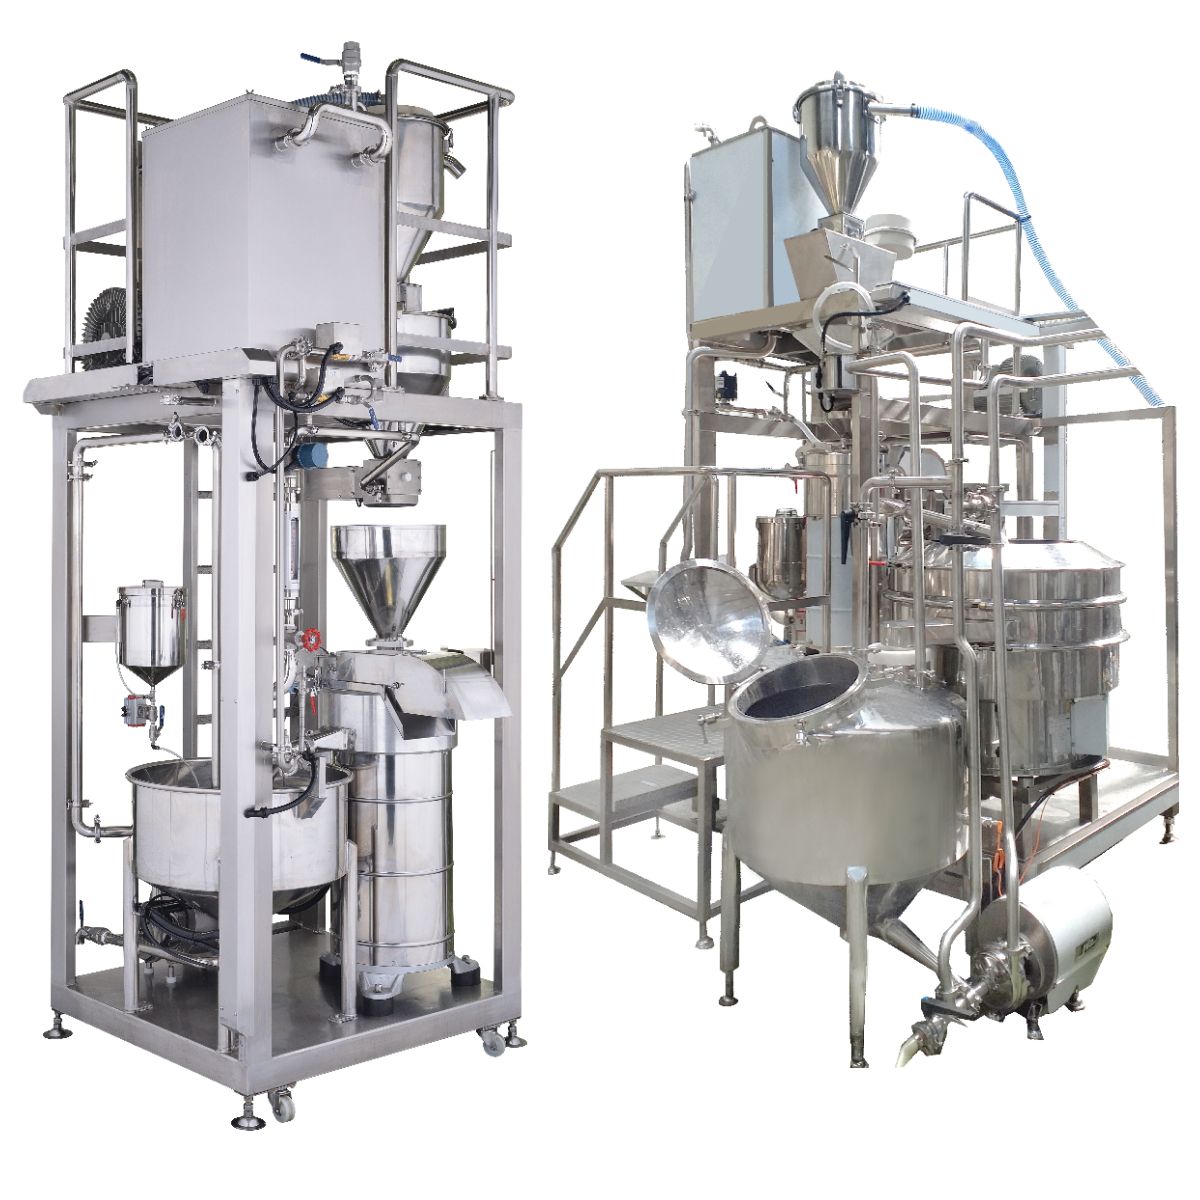 The Difference Between Health Pulp System and Cooked Pulp System